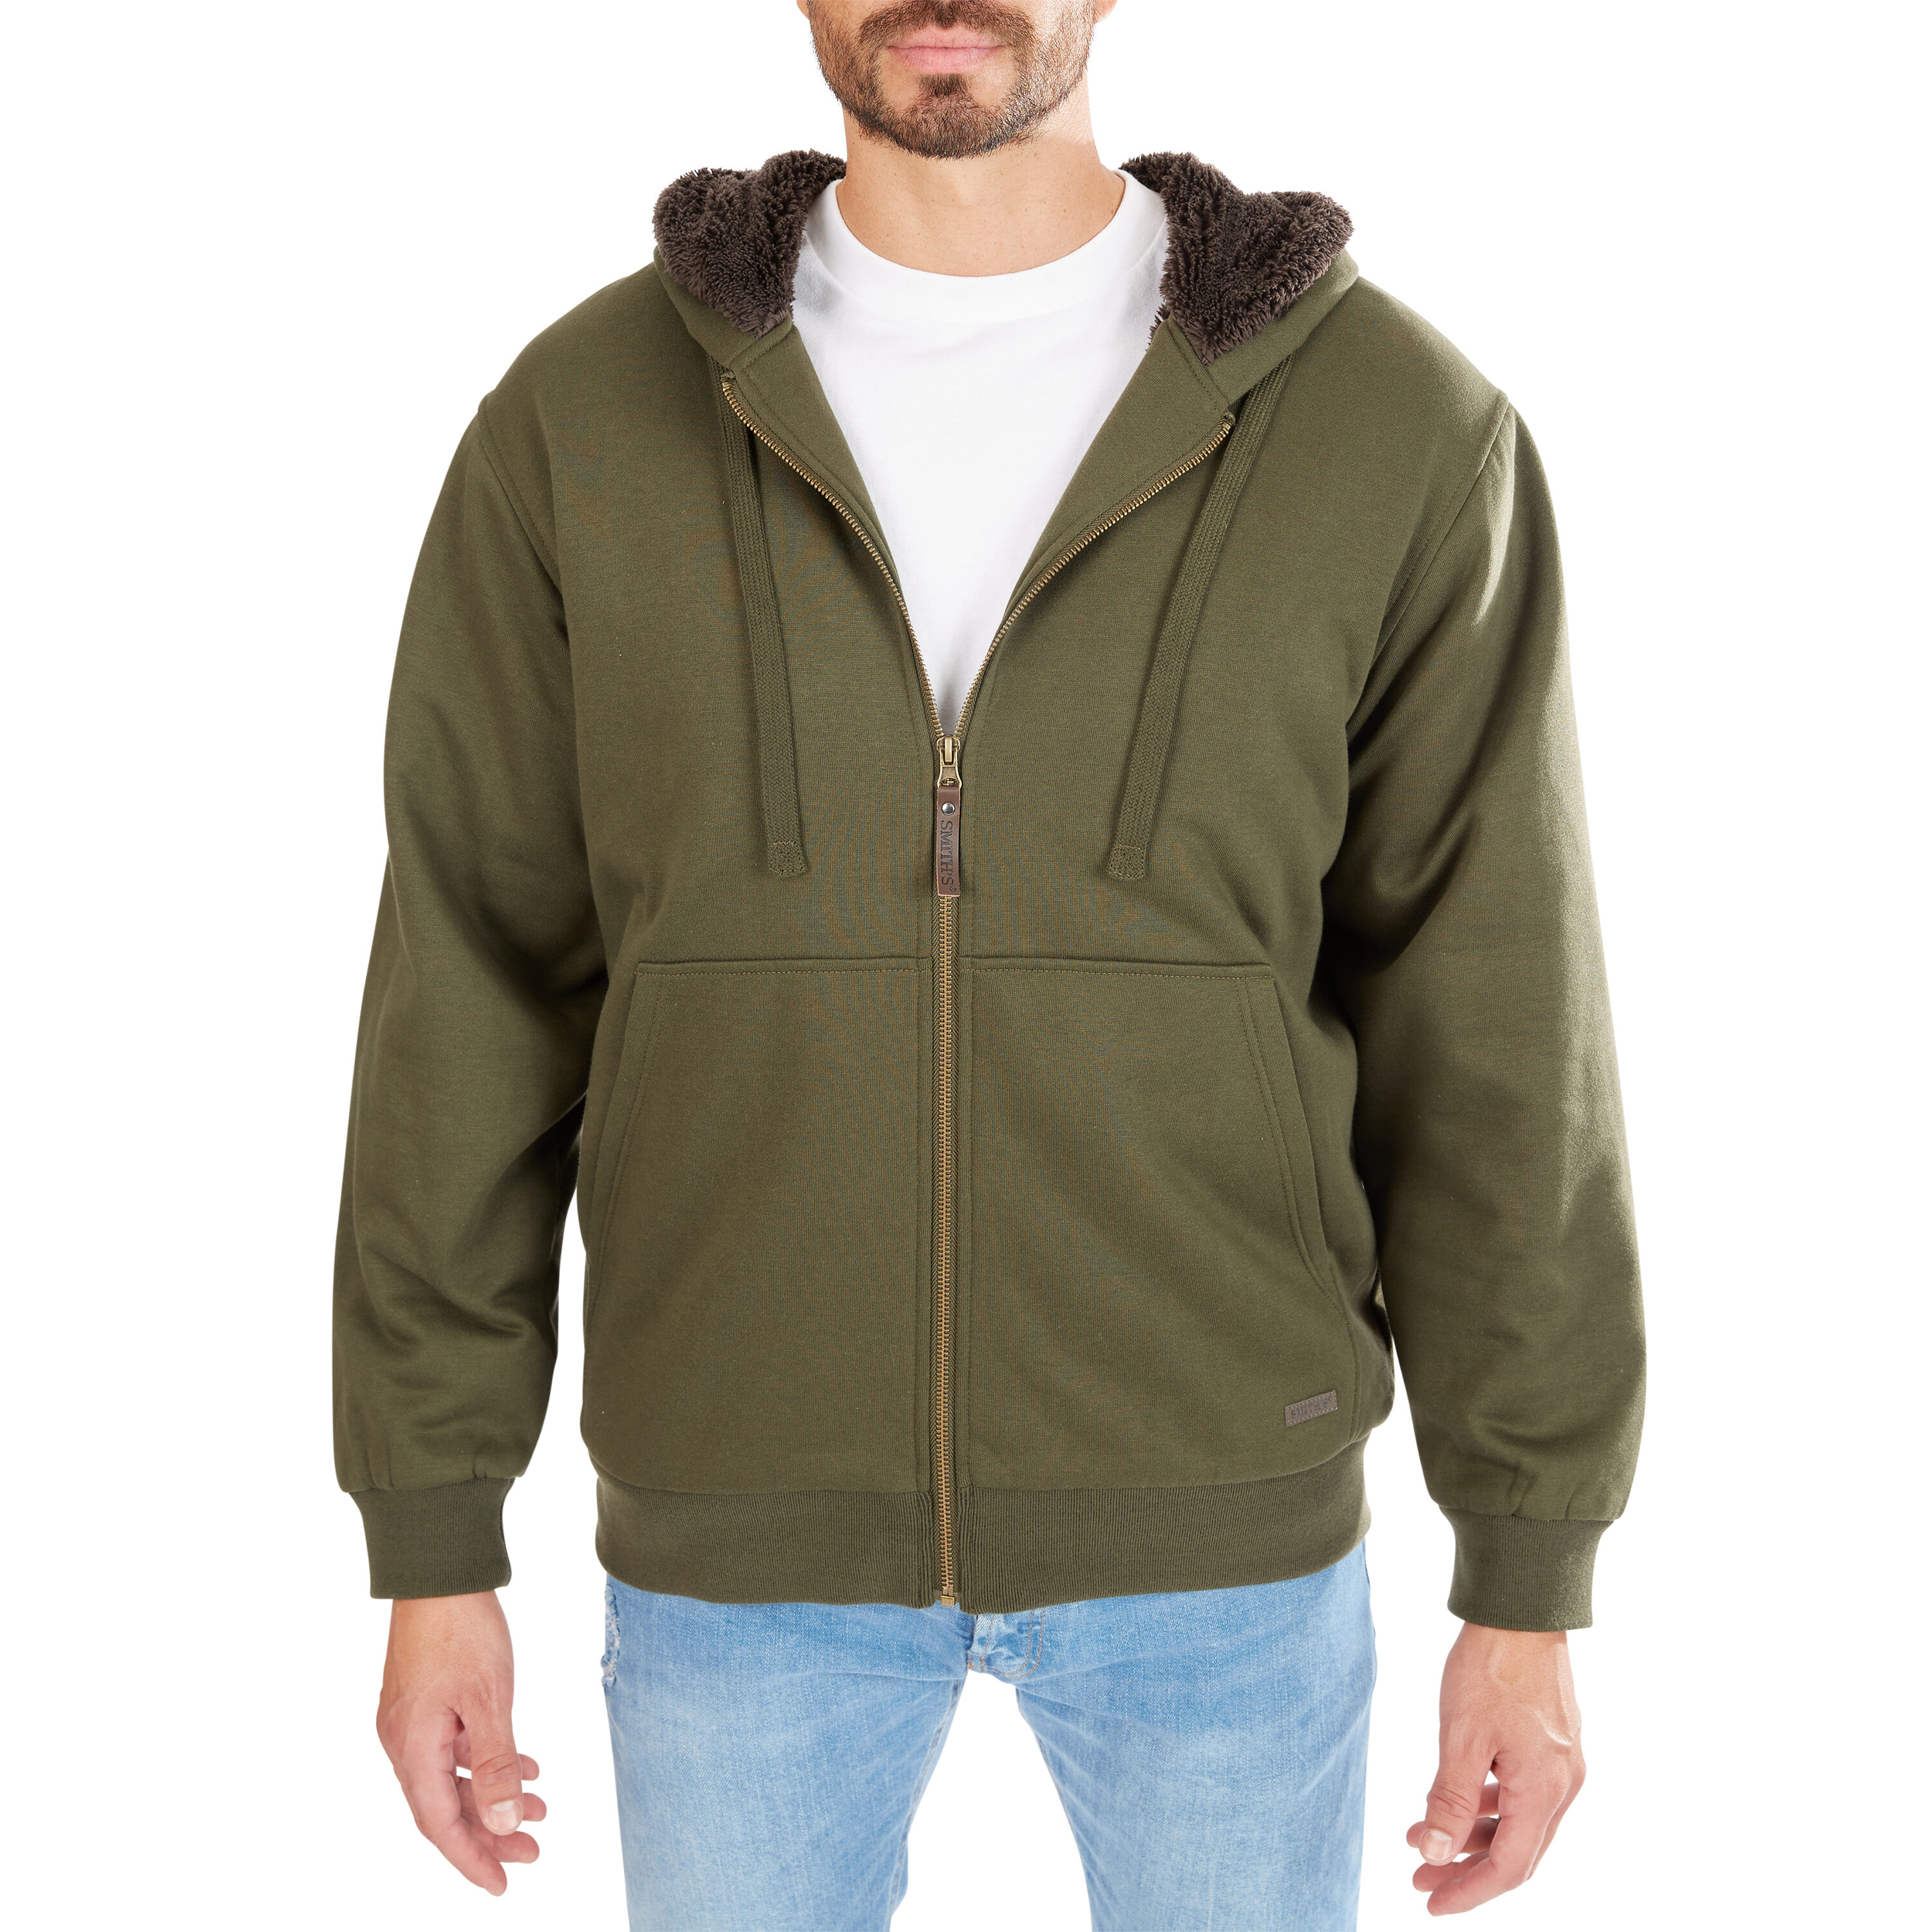 Smith's Workwear Men's XX-Large Fleece Jacket with Ultra Soft Sherpa Lining  - Black Olive - 2 Pockets - Green Color - Insulated - Hooded in the Work  Jackets & Coats department at